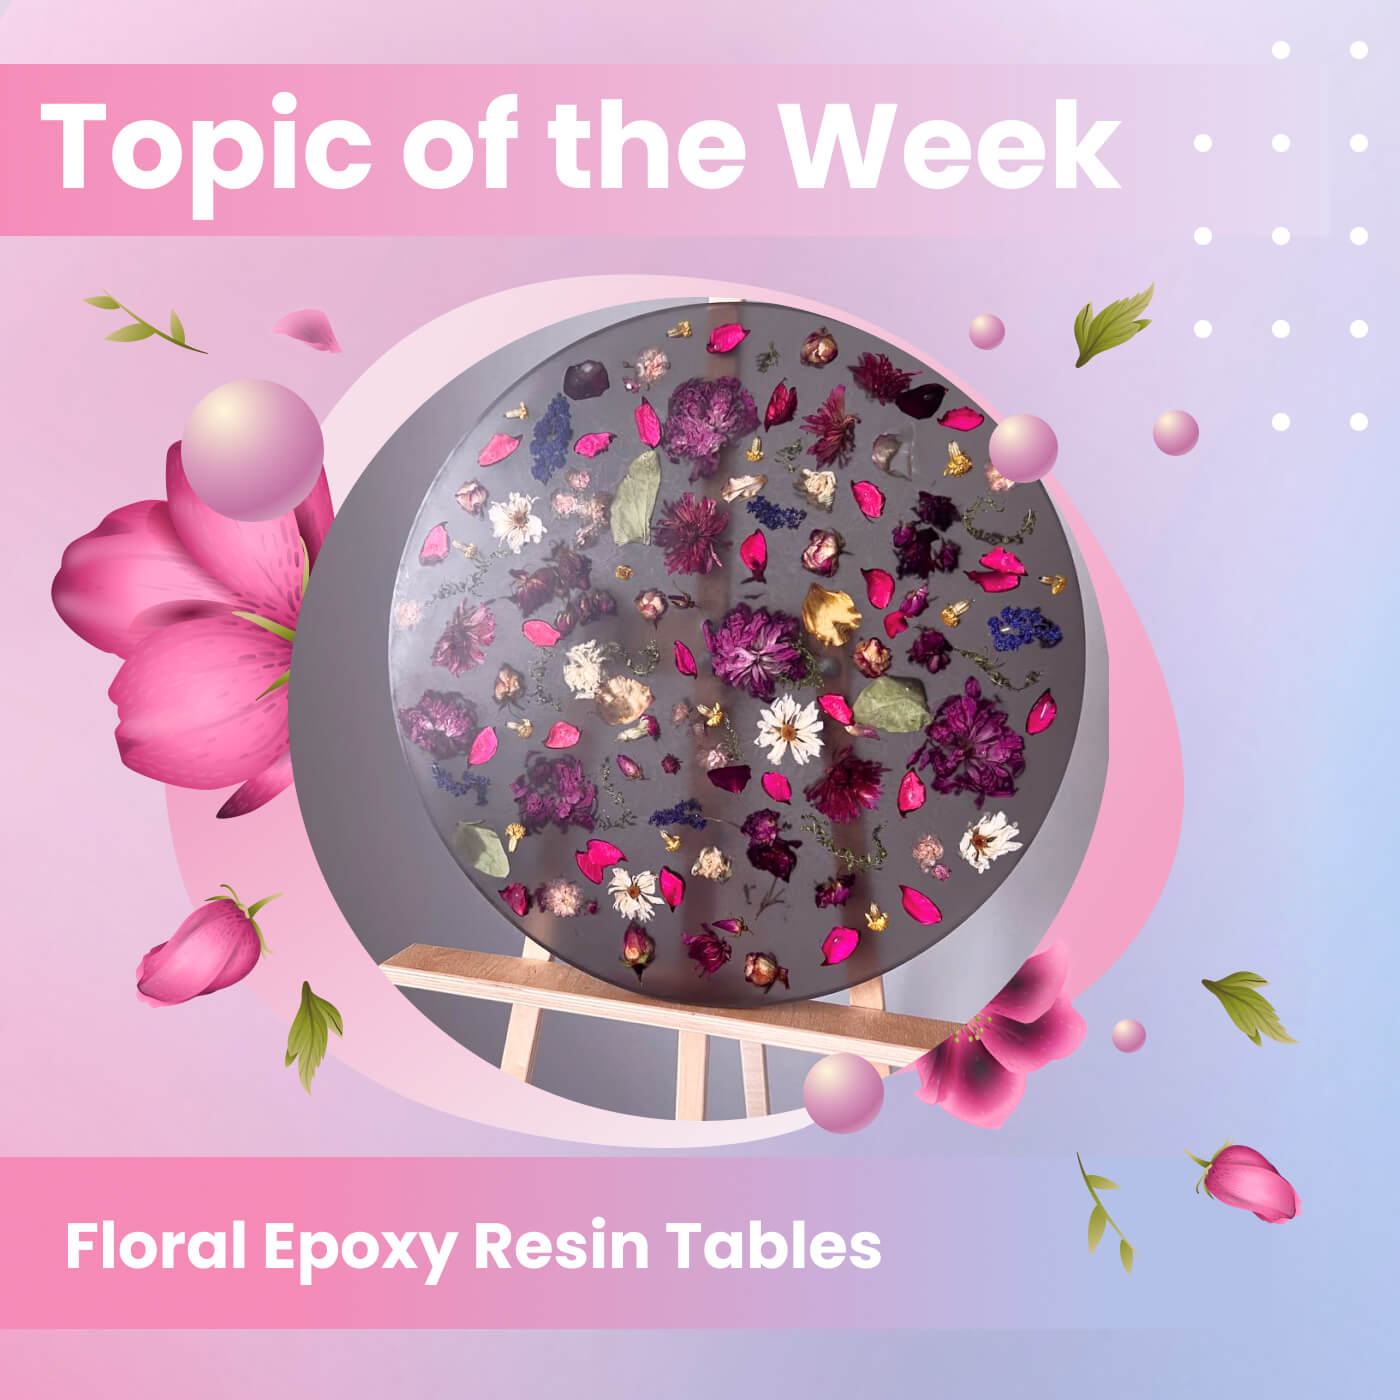 Floral Epoxy Resin Tables: A Statement of Modern Design - Craft Resin